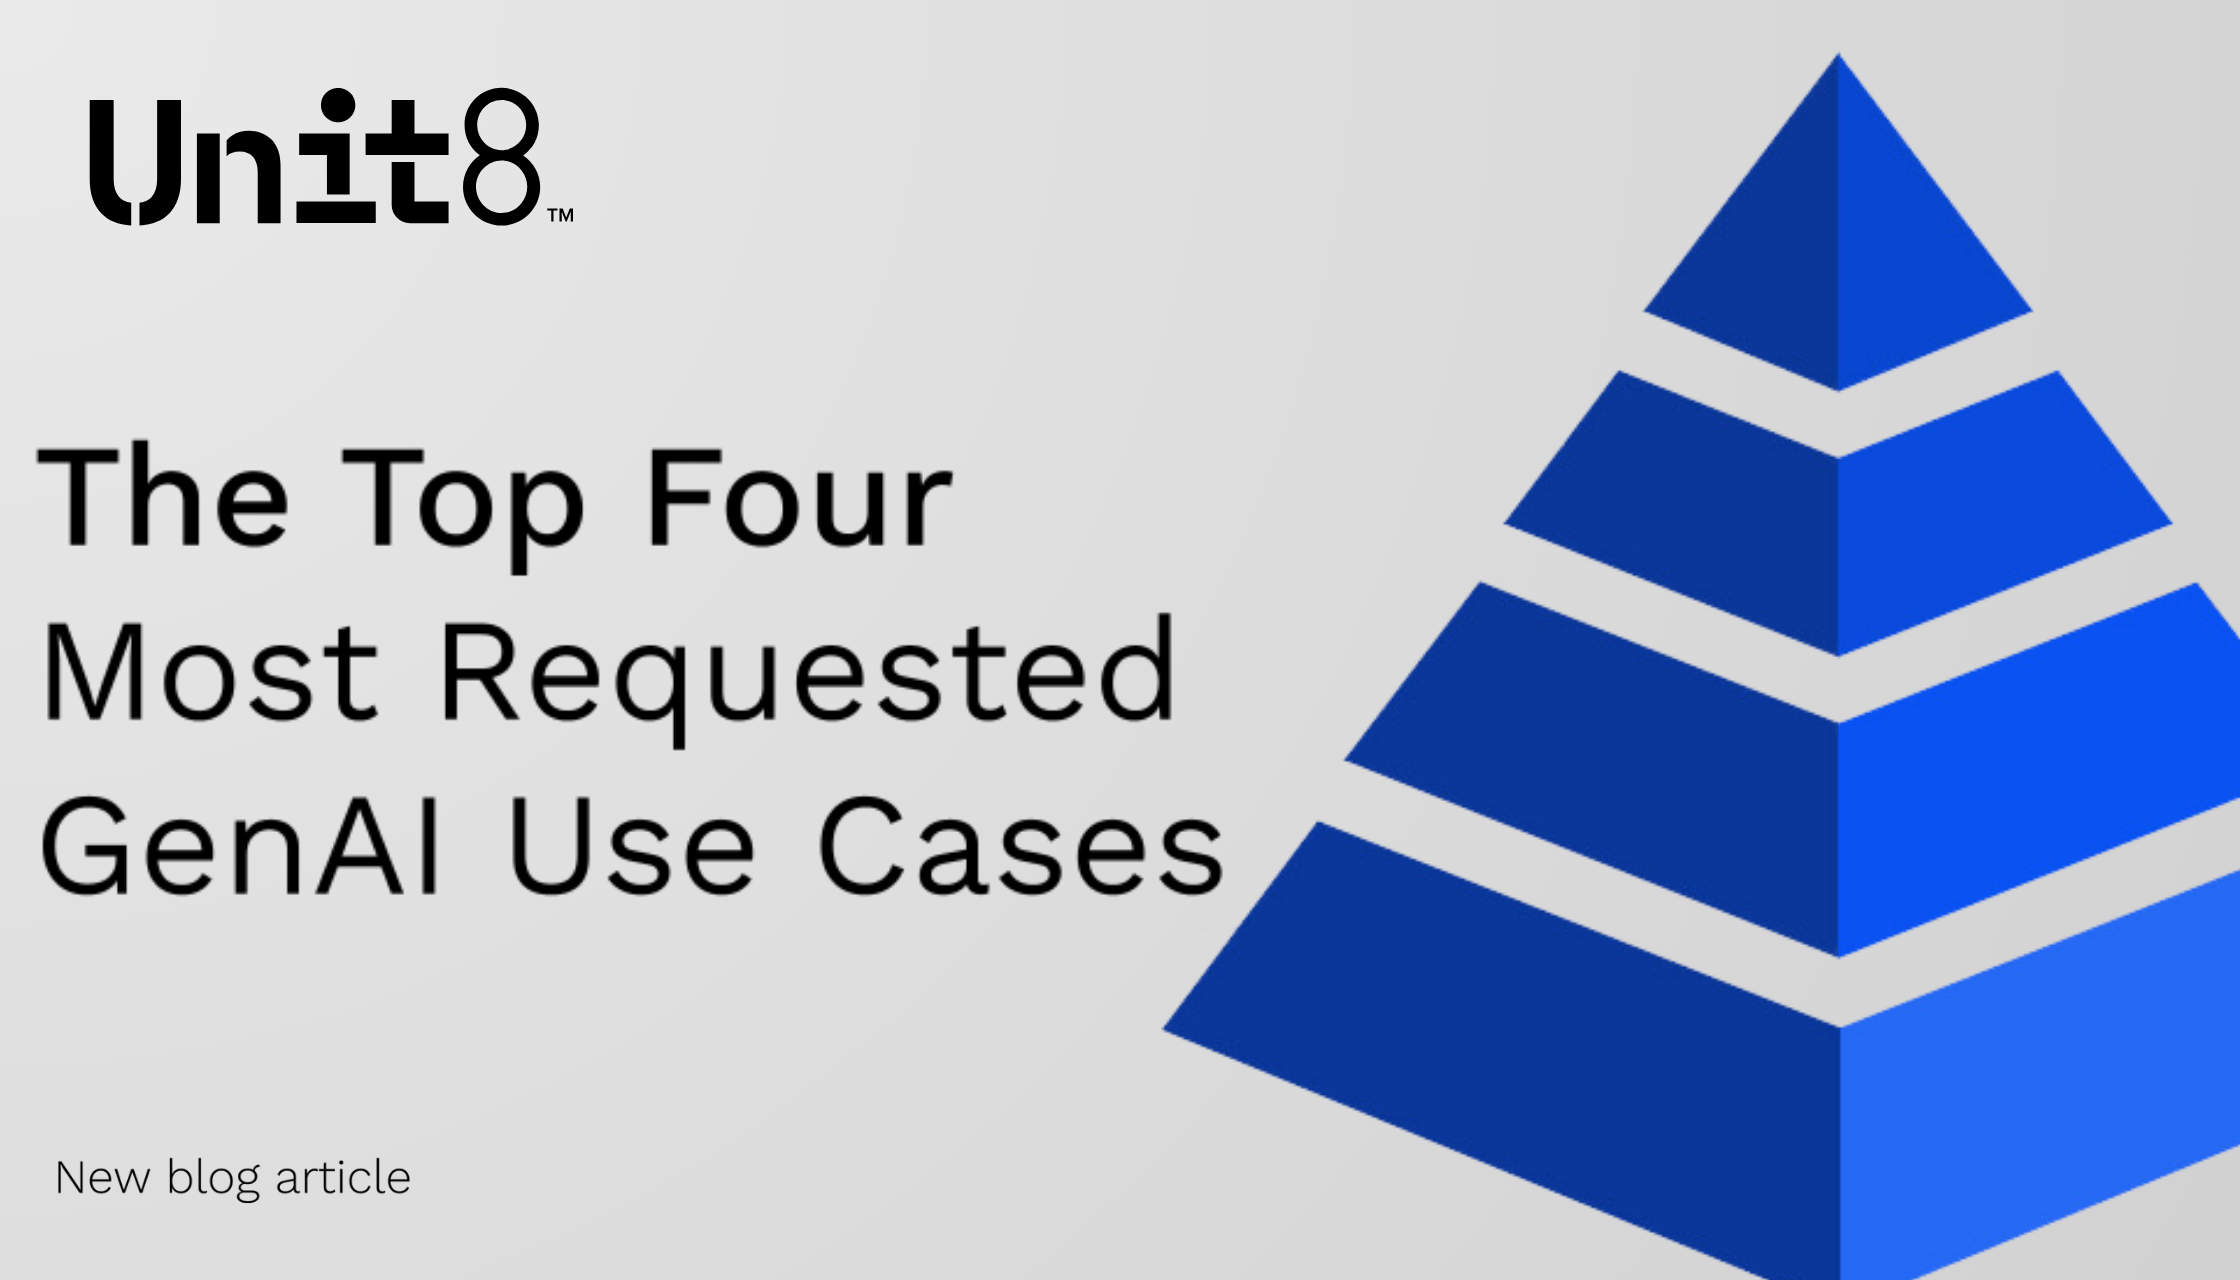 The Top Four Most Requested GenAI Use Cases